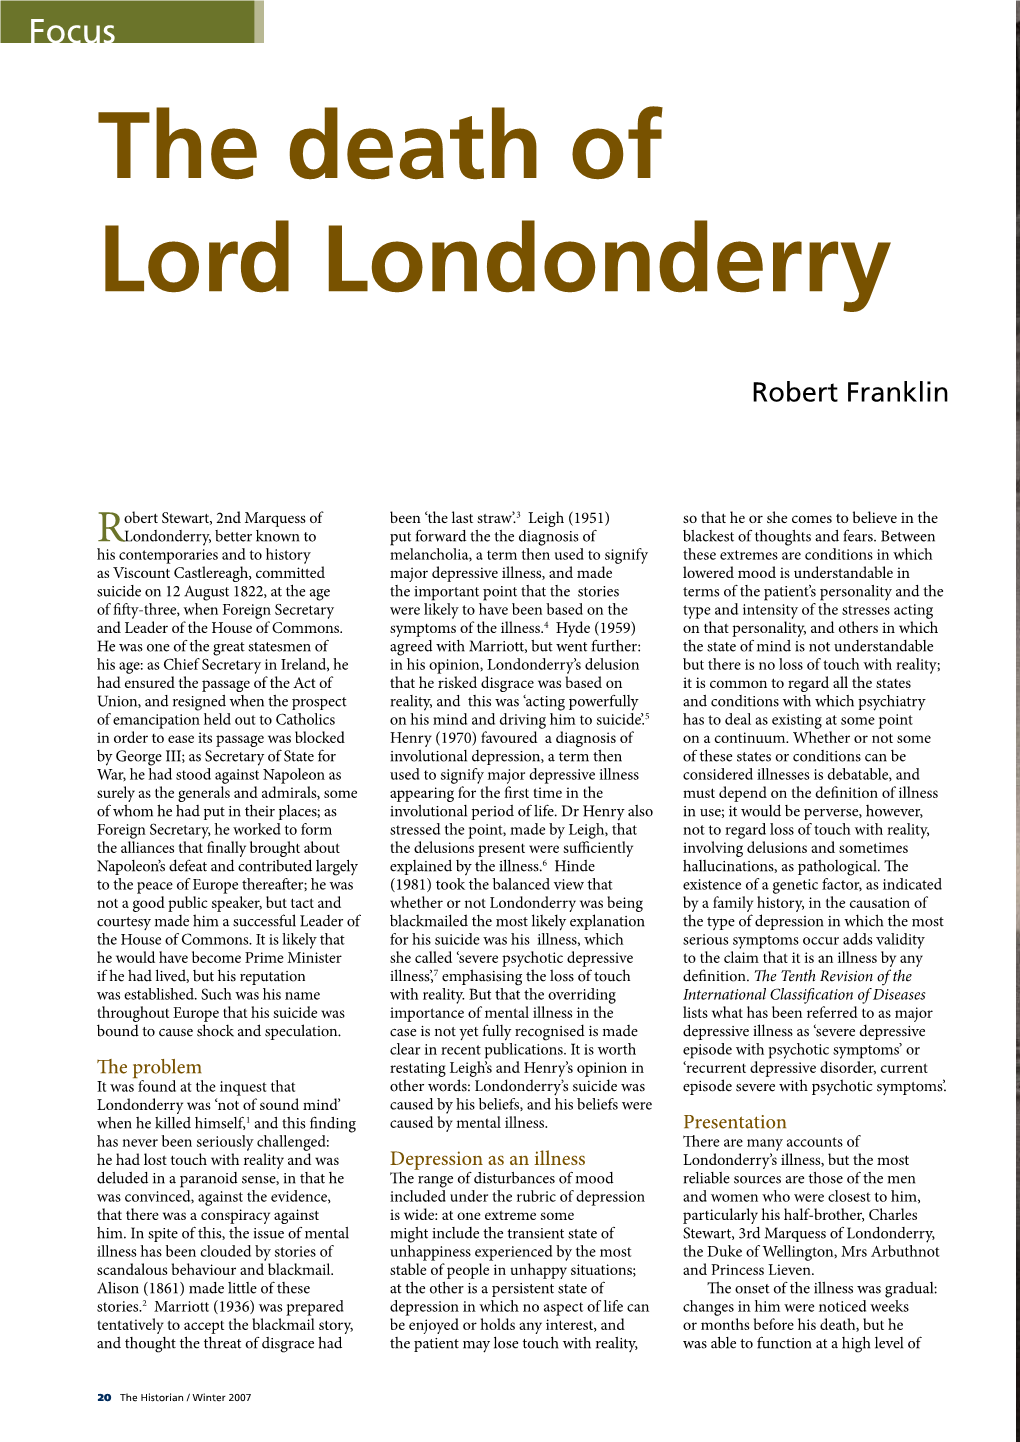 The Death of Lord Londonderry